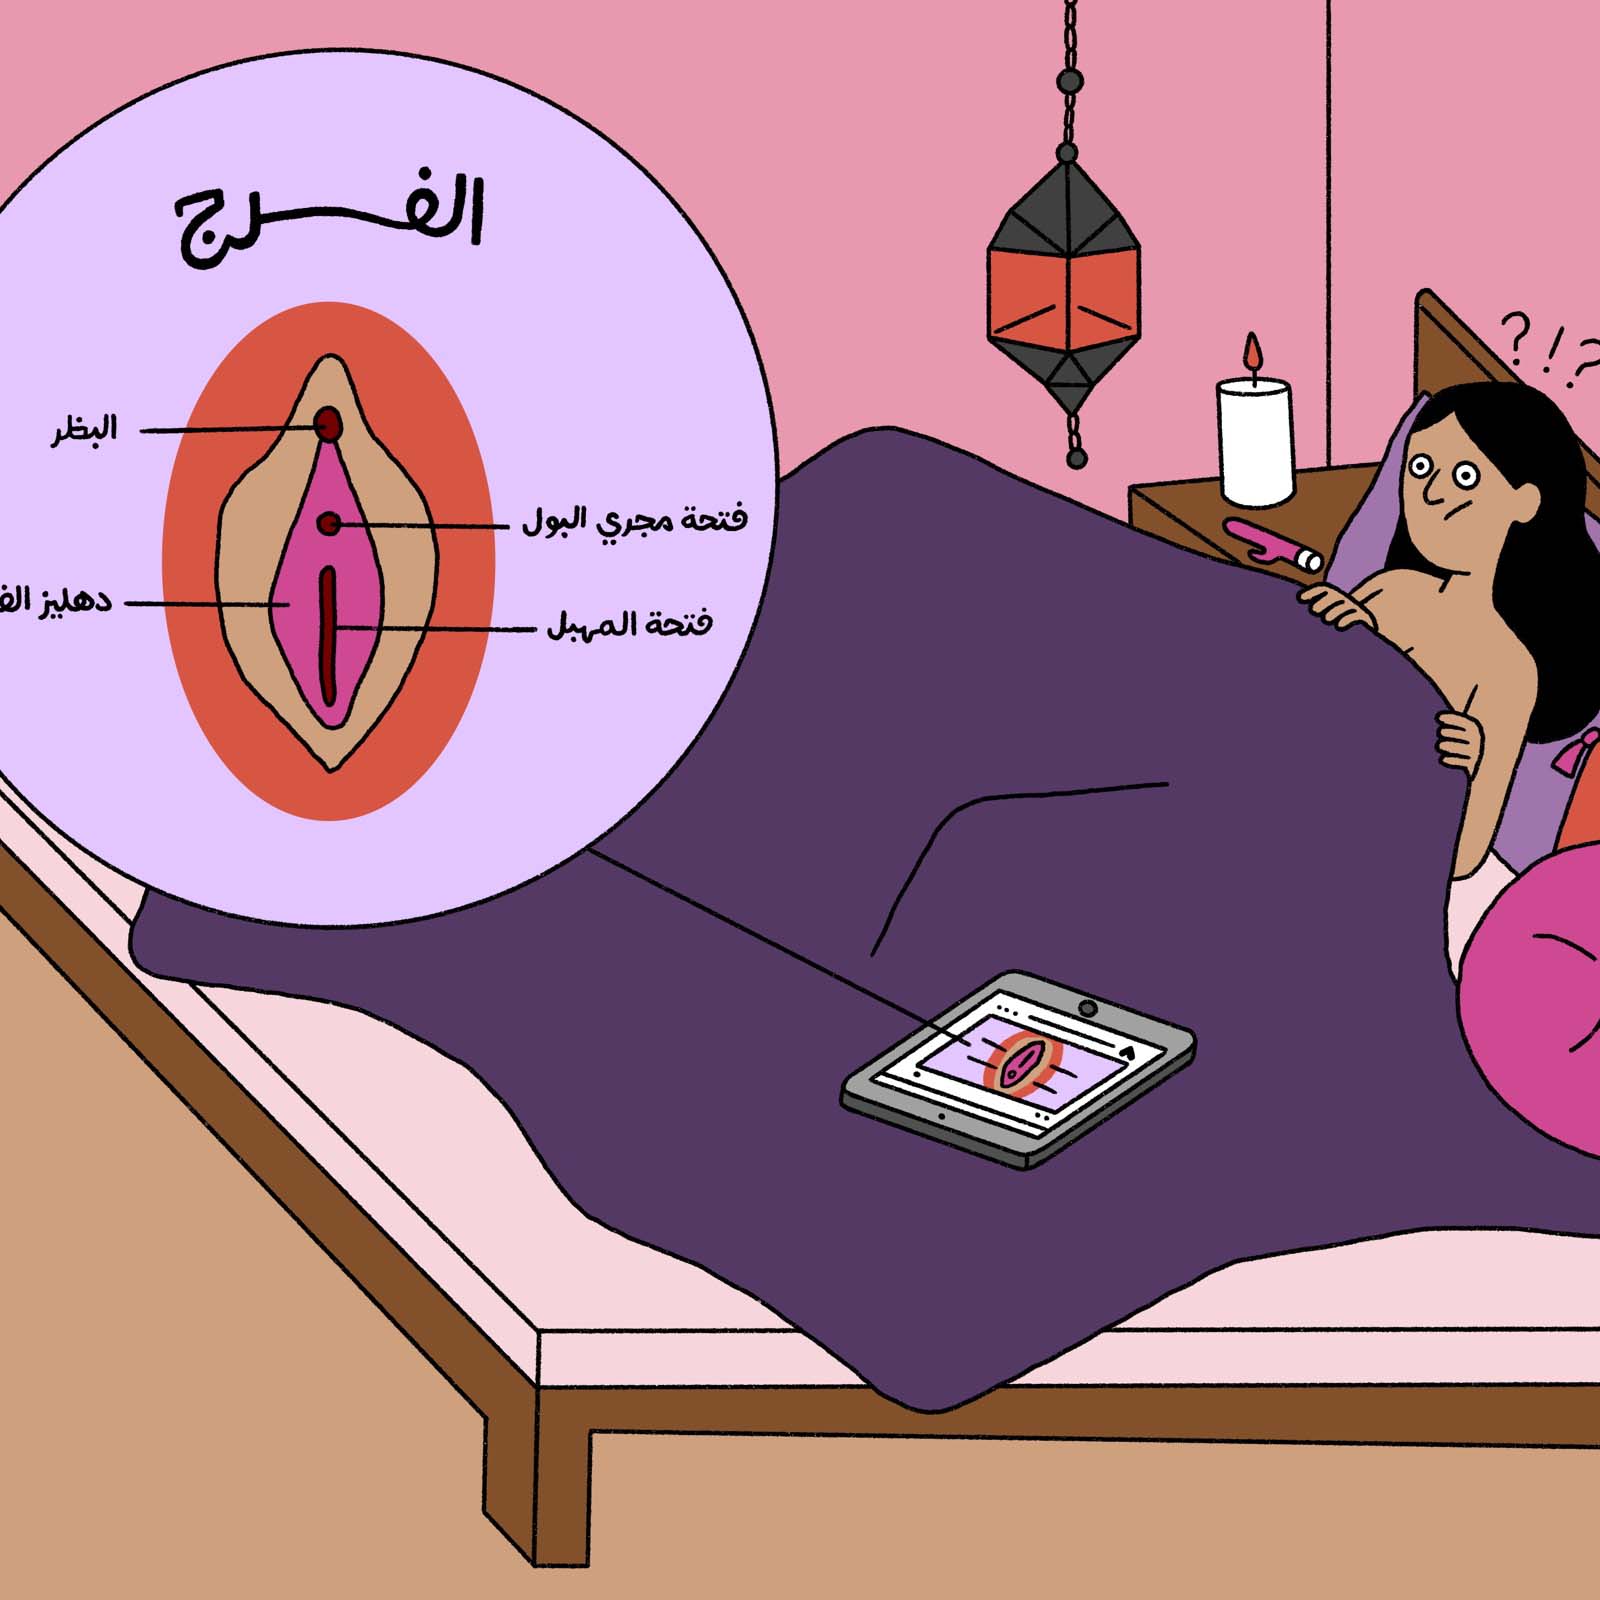 Building the Arab world's first sex ed startup